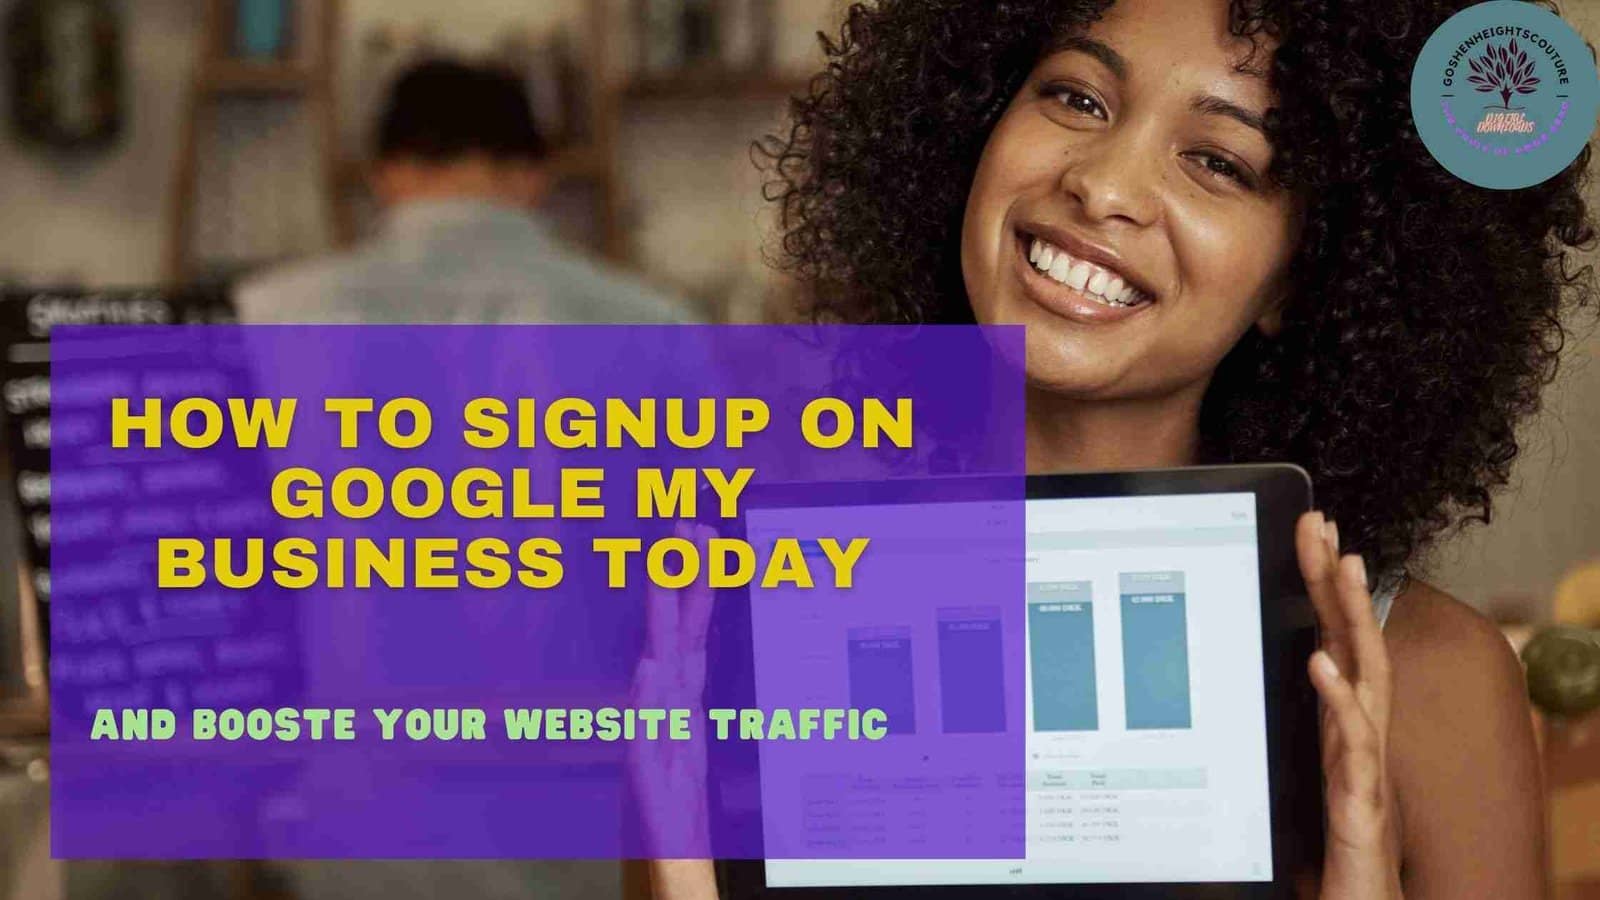 You are currently viewing HOW TO SIGN UP ON GOOGLE MY BUSINESS TODAY AND BOOST YOUR WEBSITE TRAFFIC